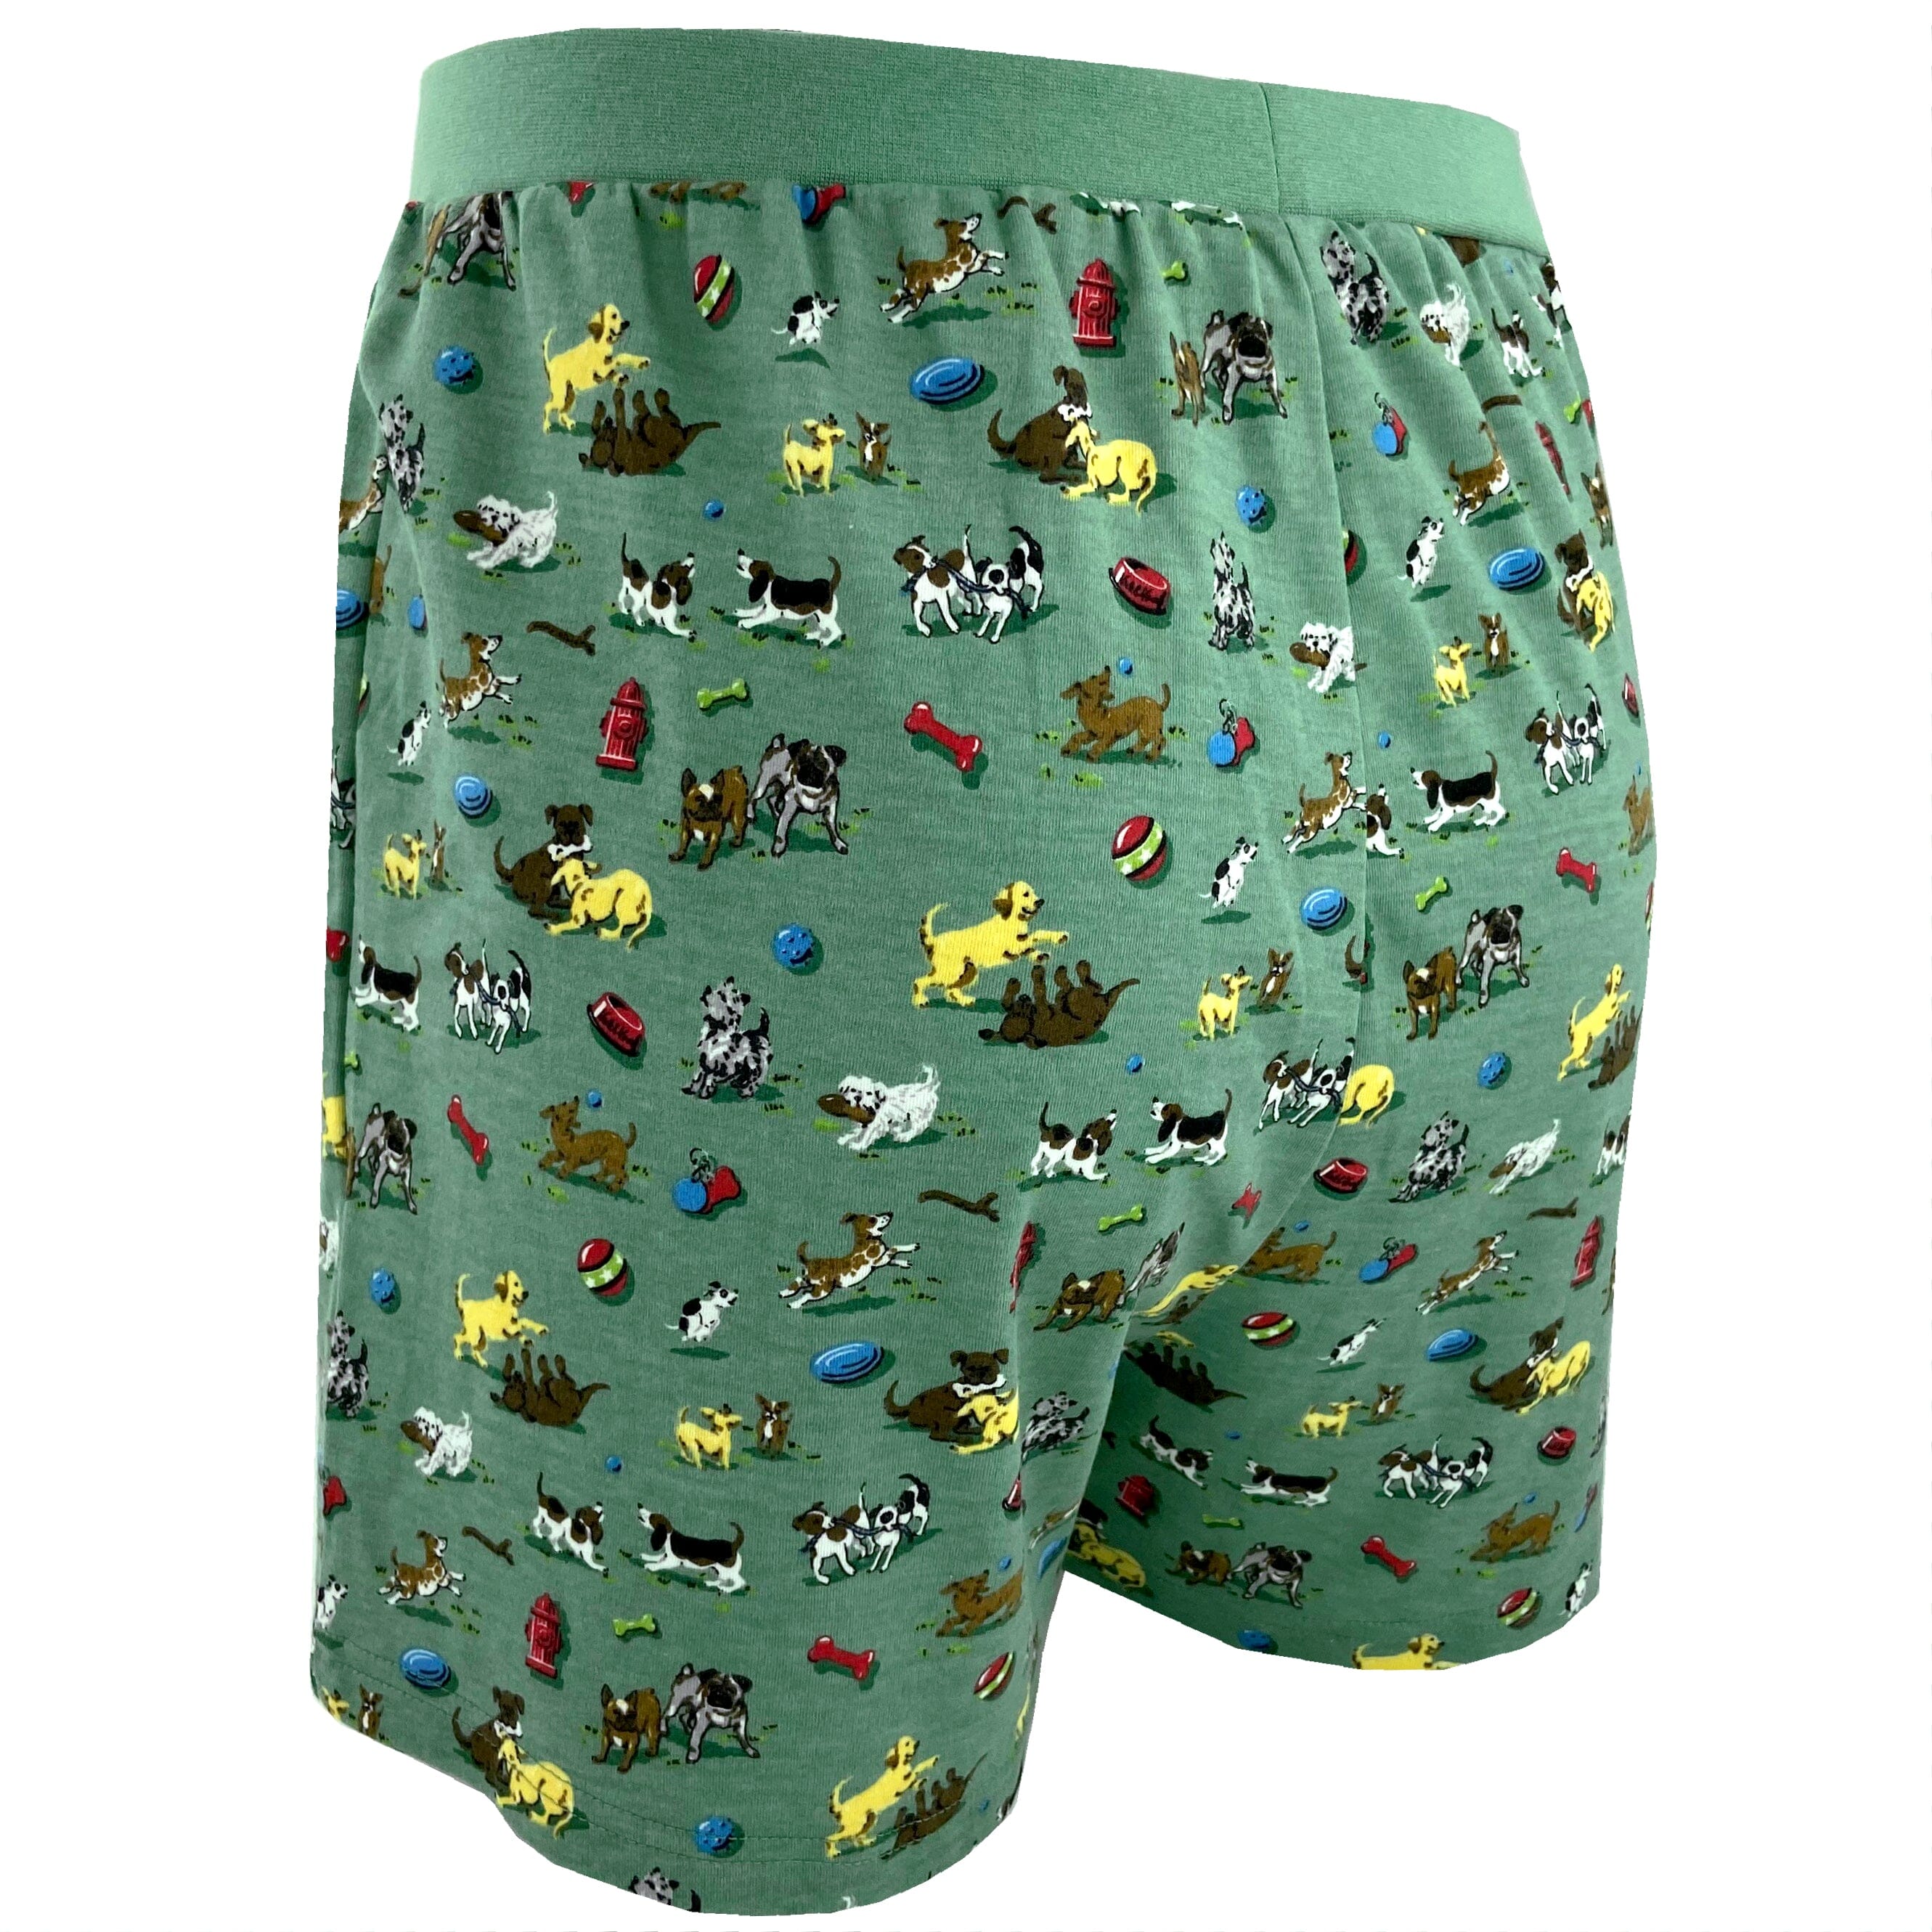 Men's Happy Puppy Dog All Over Print Knit Boxer Pajama Shorts in Green